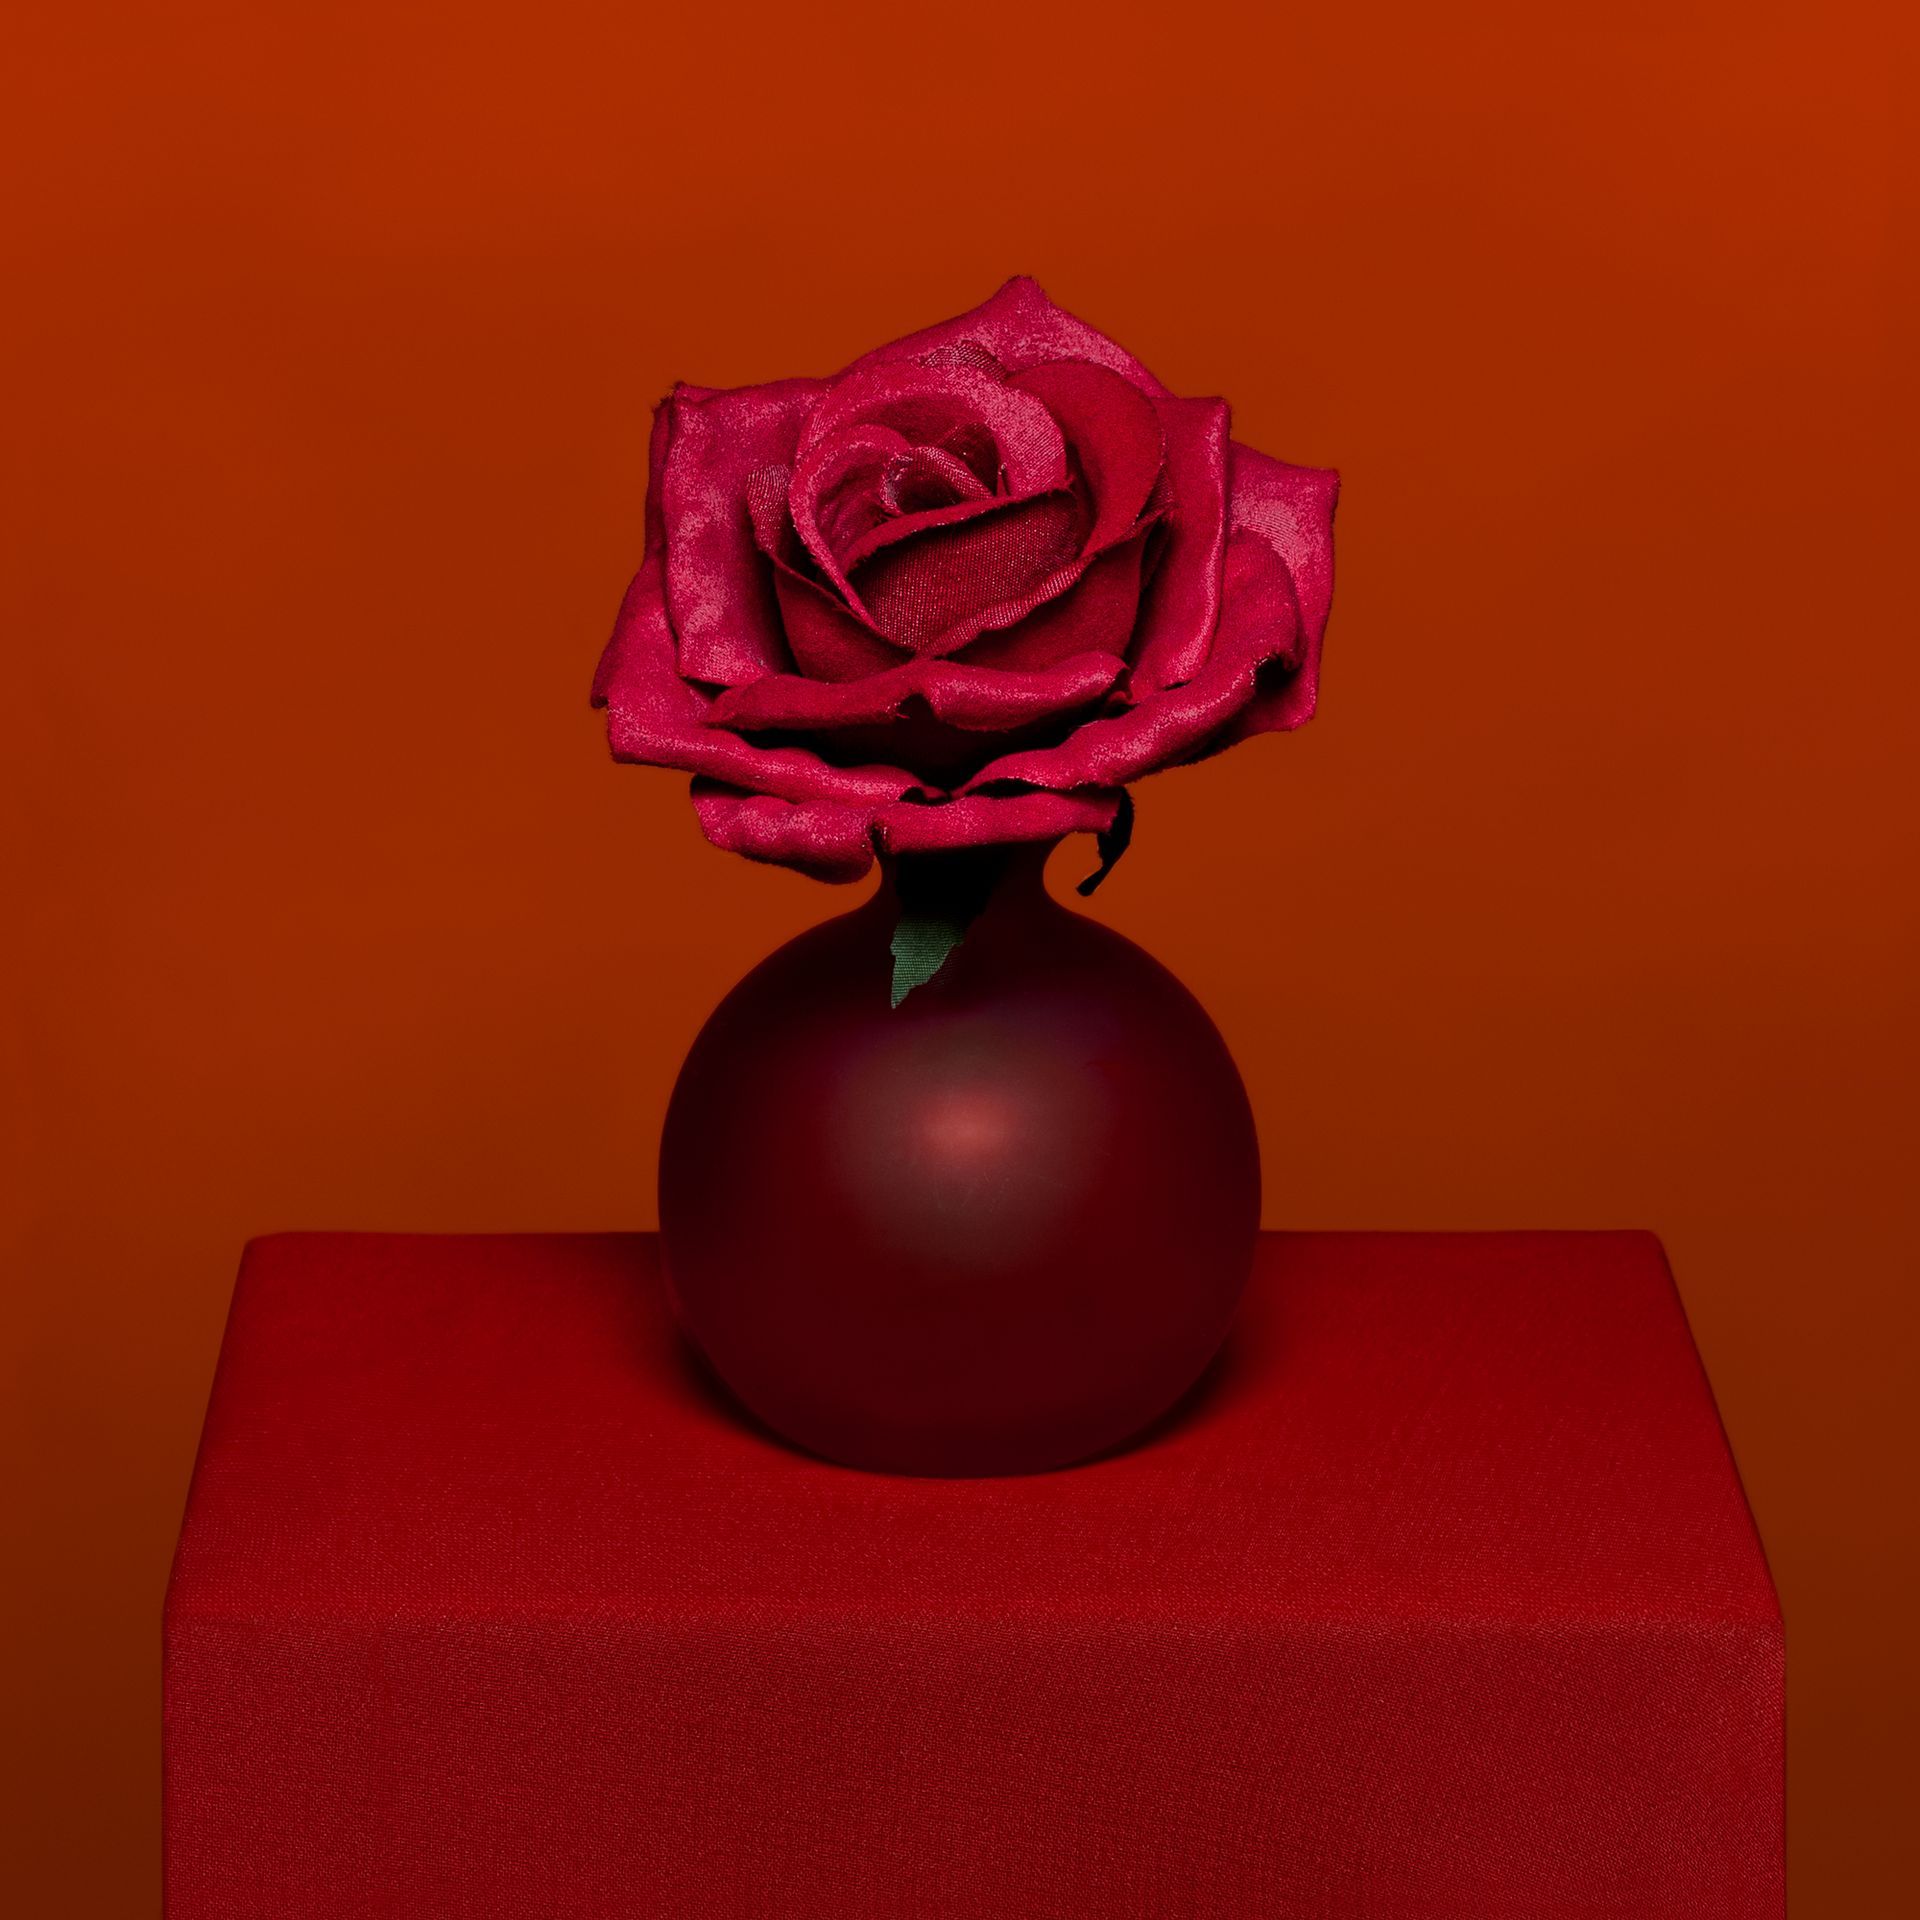 Roses are Red - 25x25 cm - € 135,00